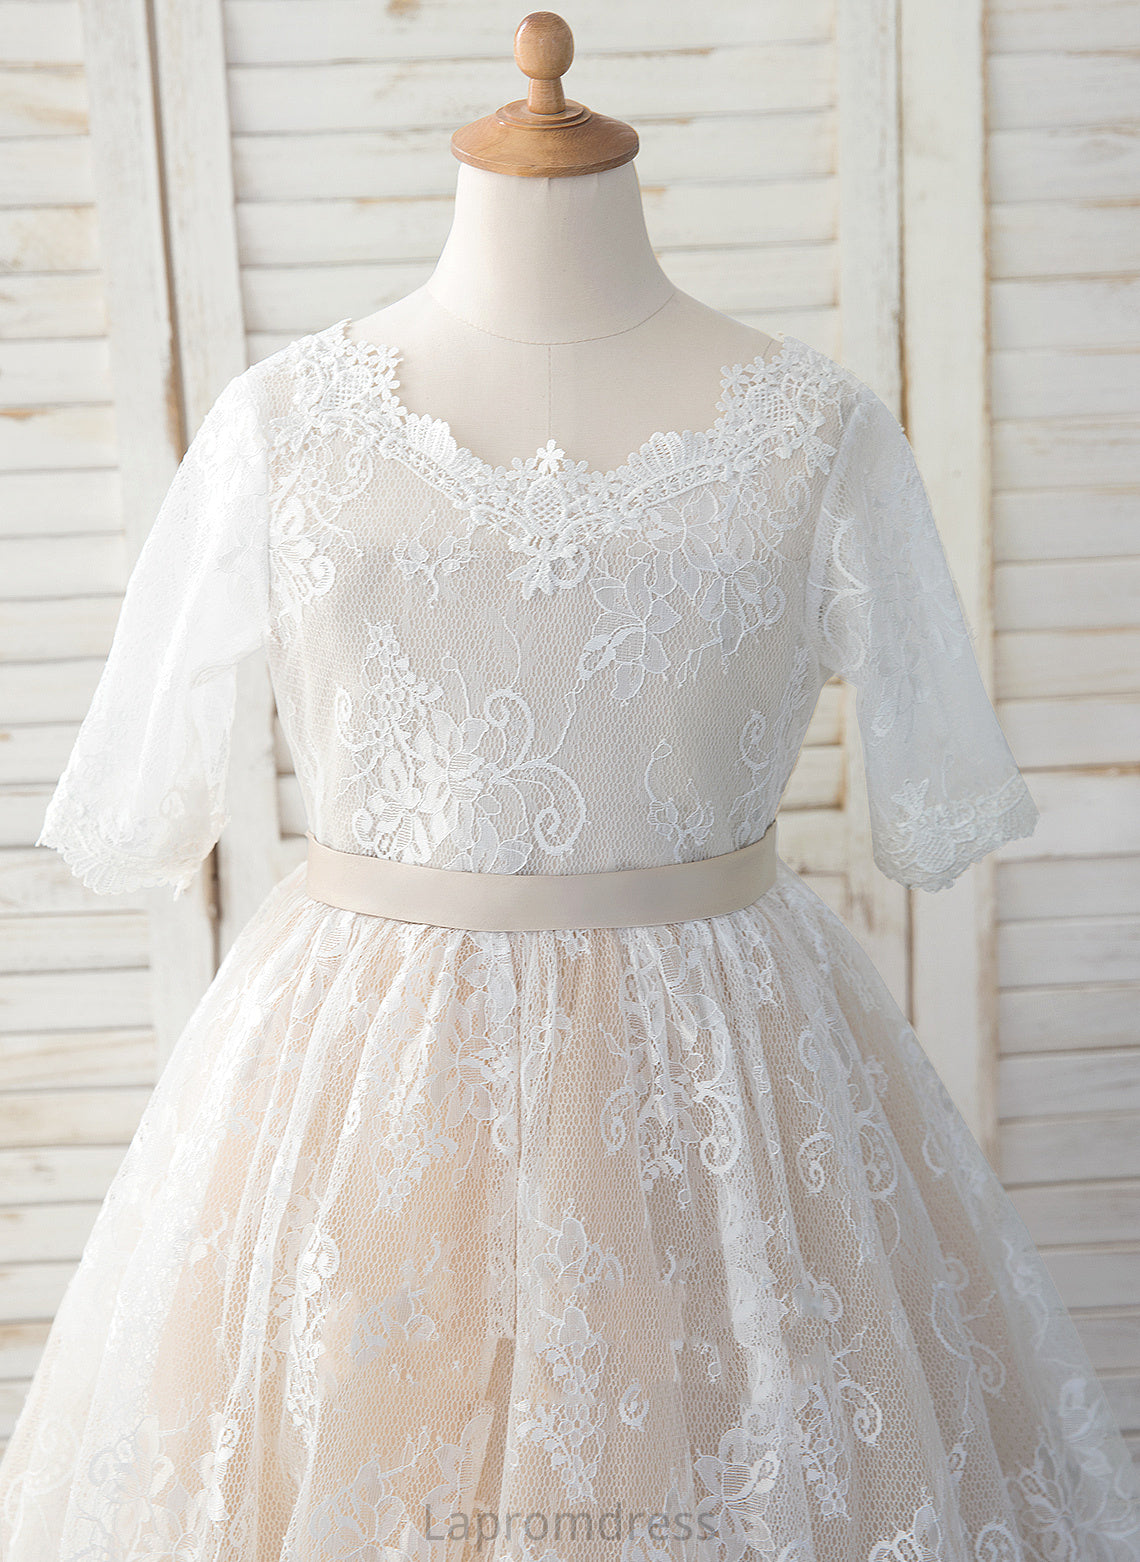 Scoop Flower Neck Bow(s) Sleeves Tea-length Girl Tulle/Lace A-Line - Dress Joselyn 3/4 Flower Girl Dresses With